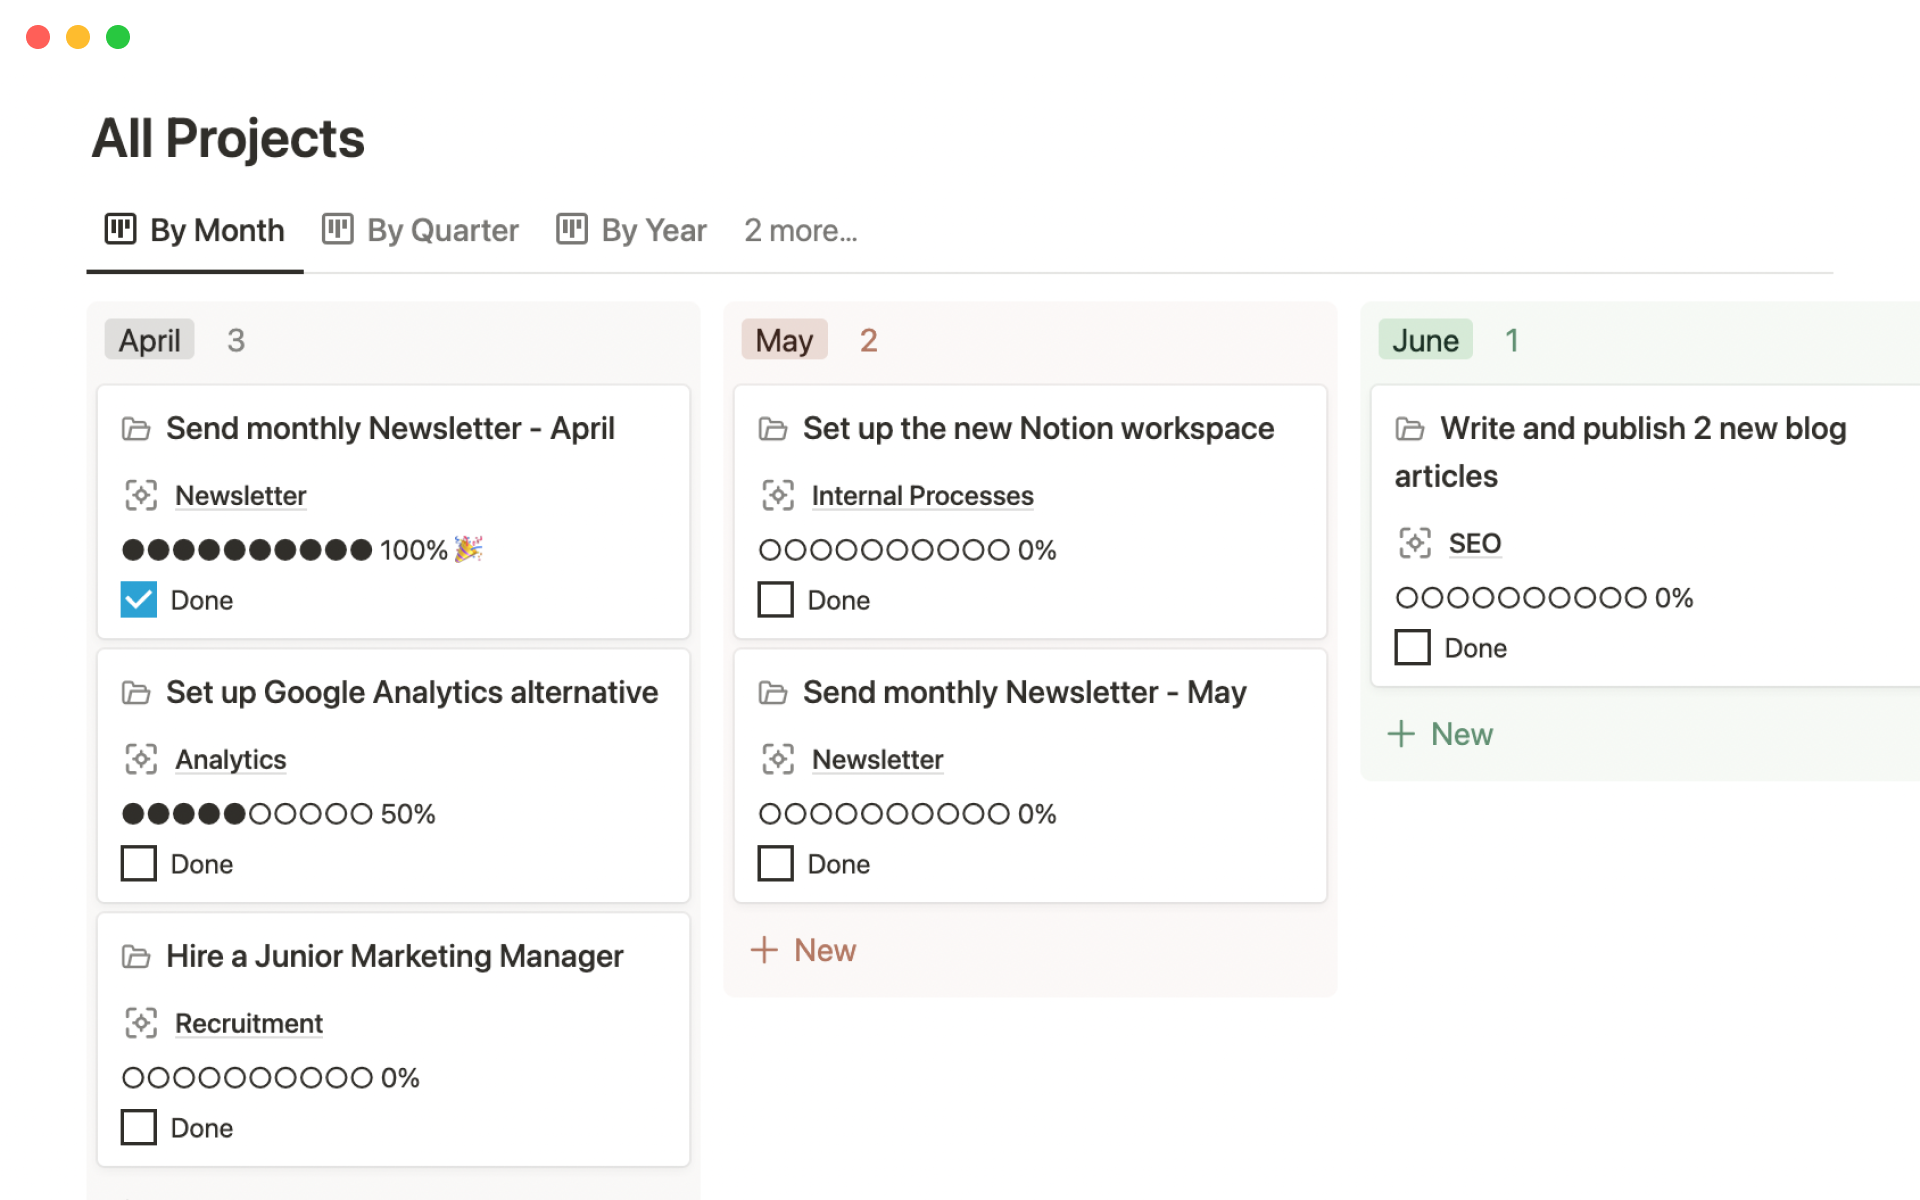 Prevent problems by organizing your internal process documentation in Notion